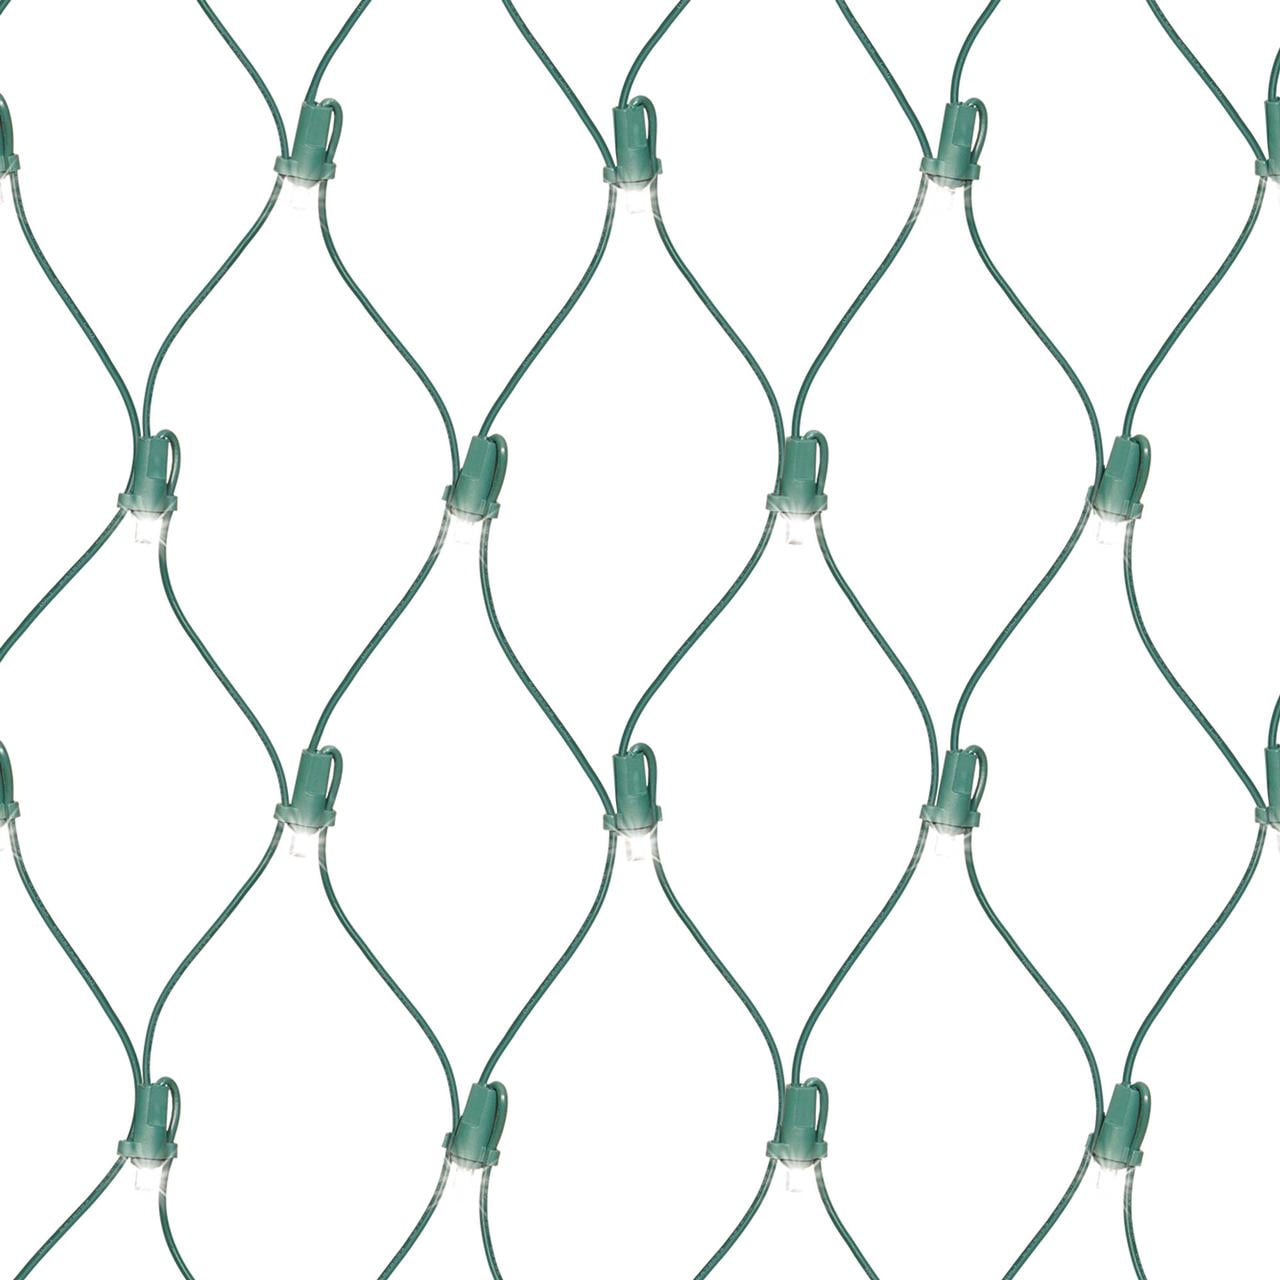 Holiday Time 150-Count Cool White LED Net Christmas Lights, with Green Wire, 24 sq. ft.